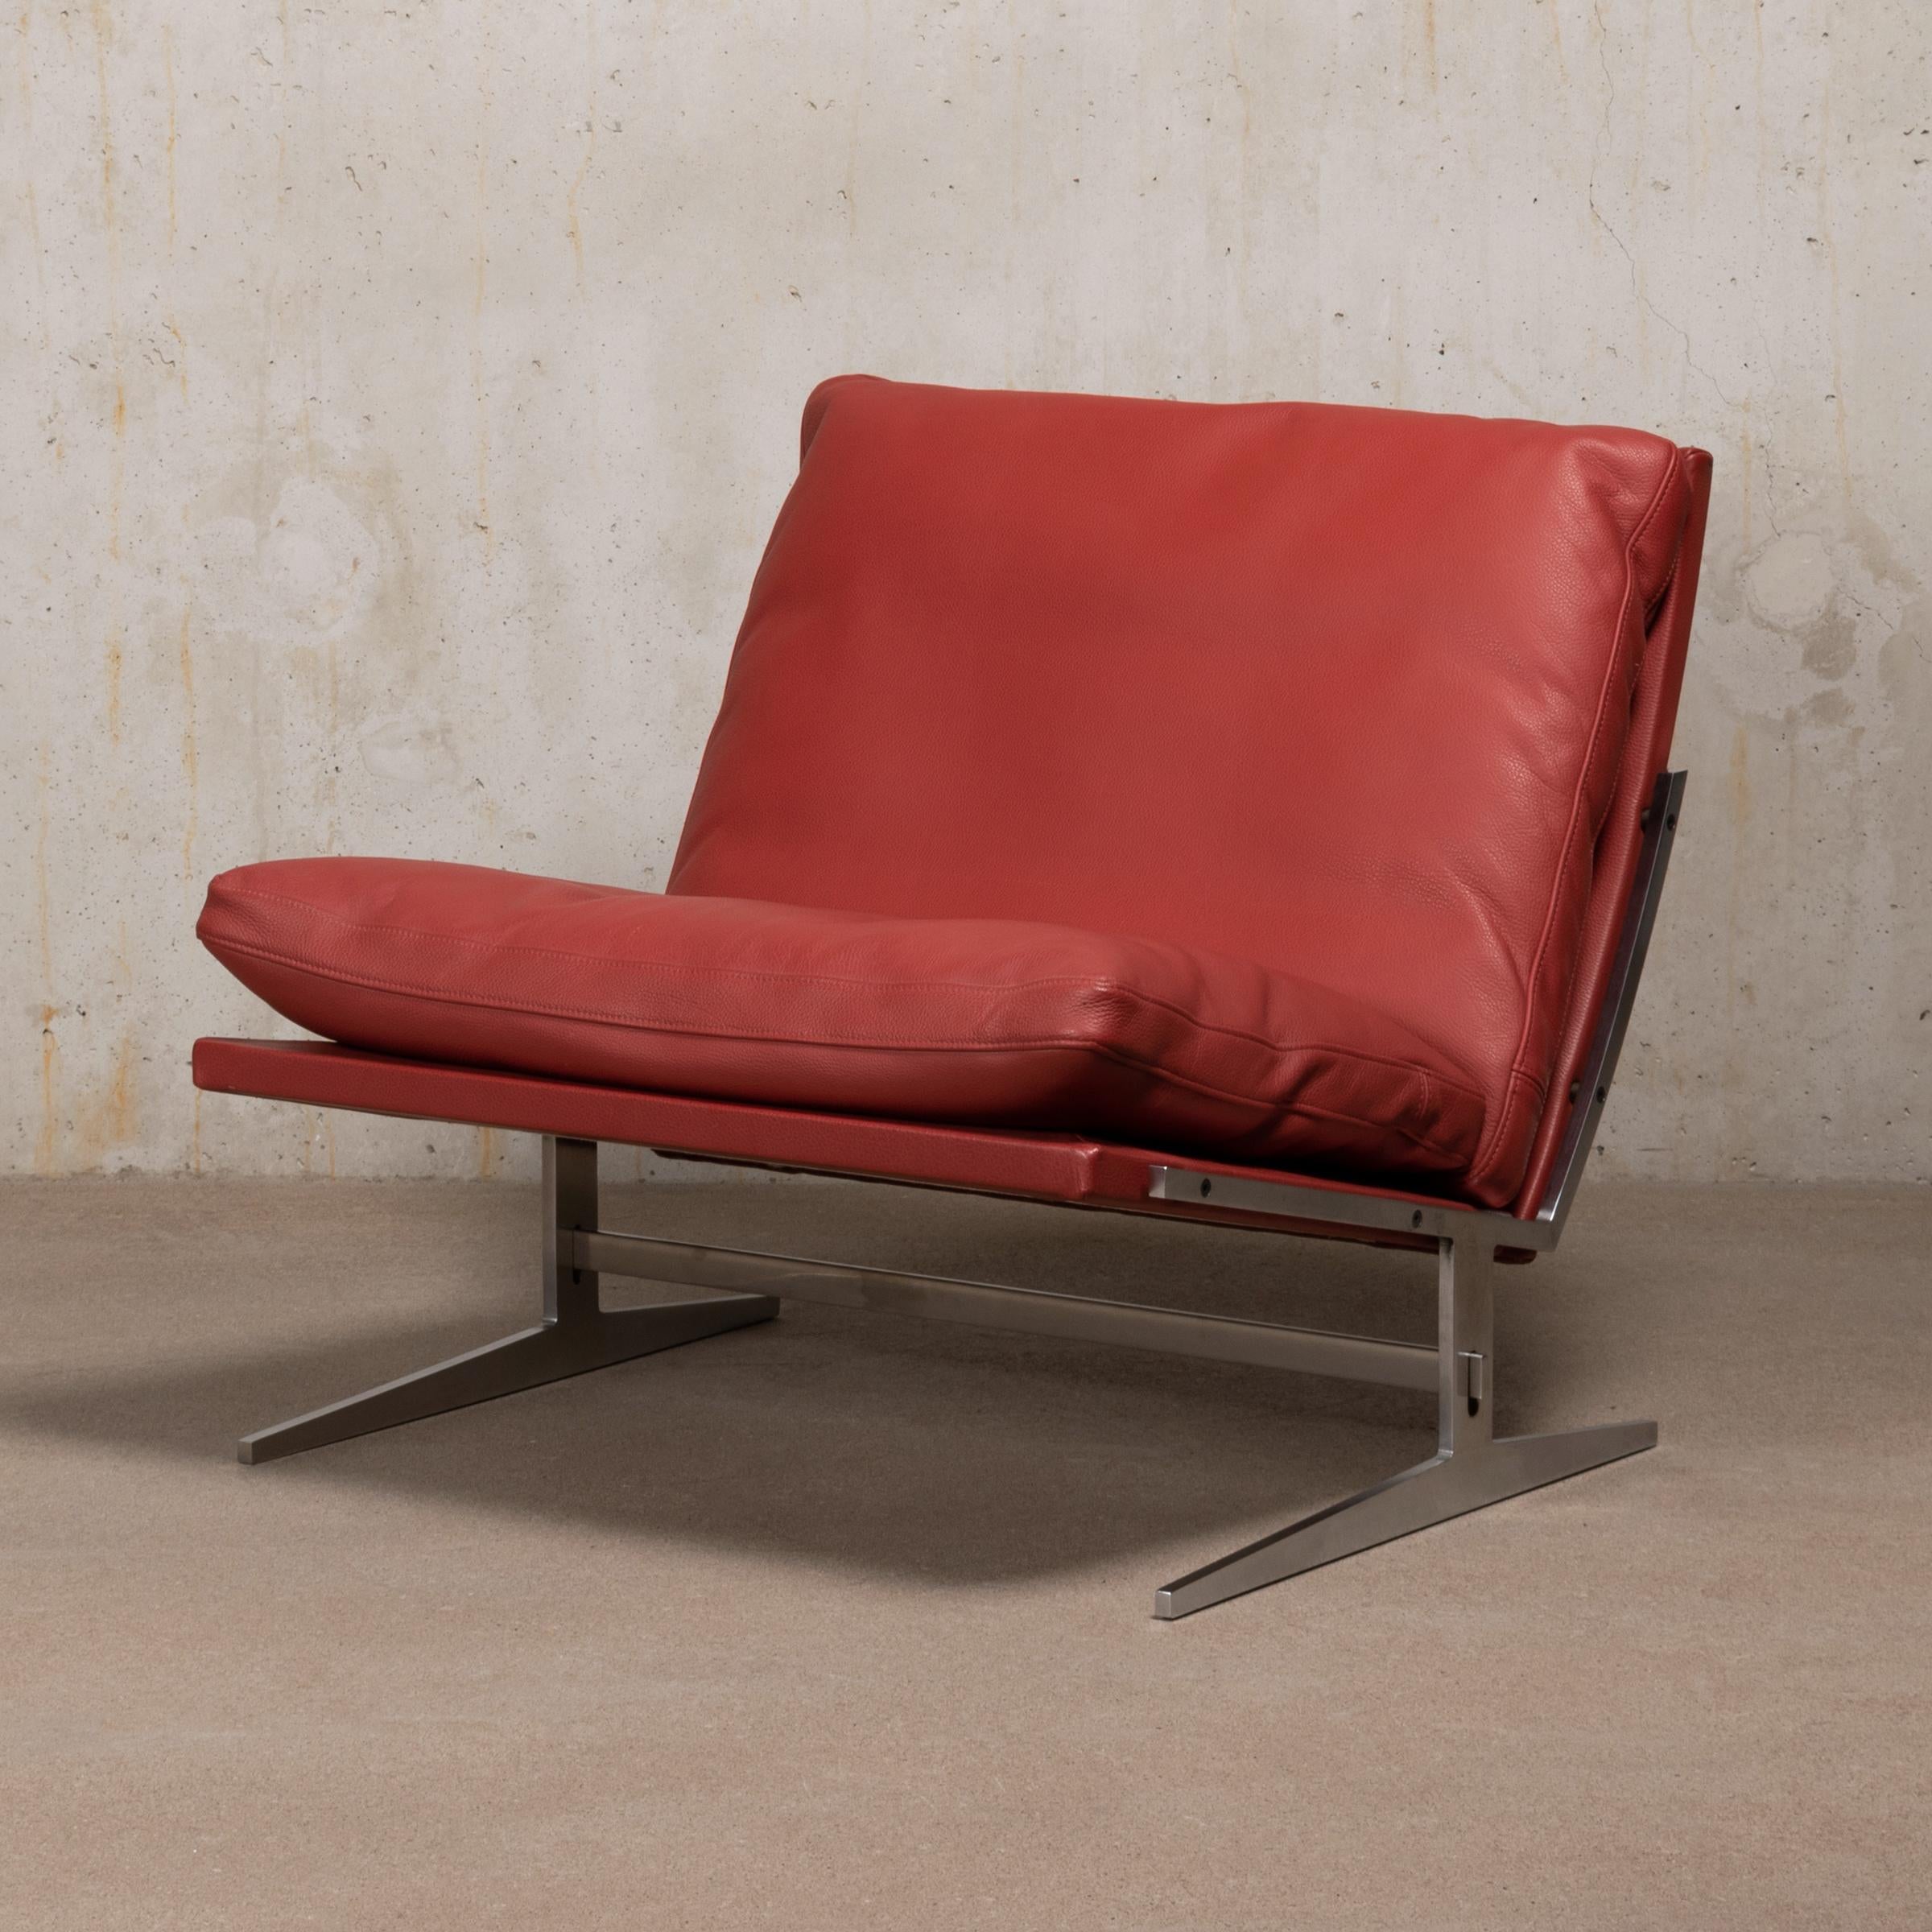 Kastholm & Fabricius BO-561 Lounge Chair in Ruby Red Leather by Bo-Ex Denmark 1